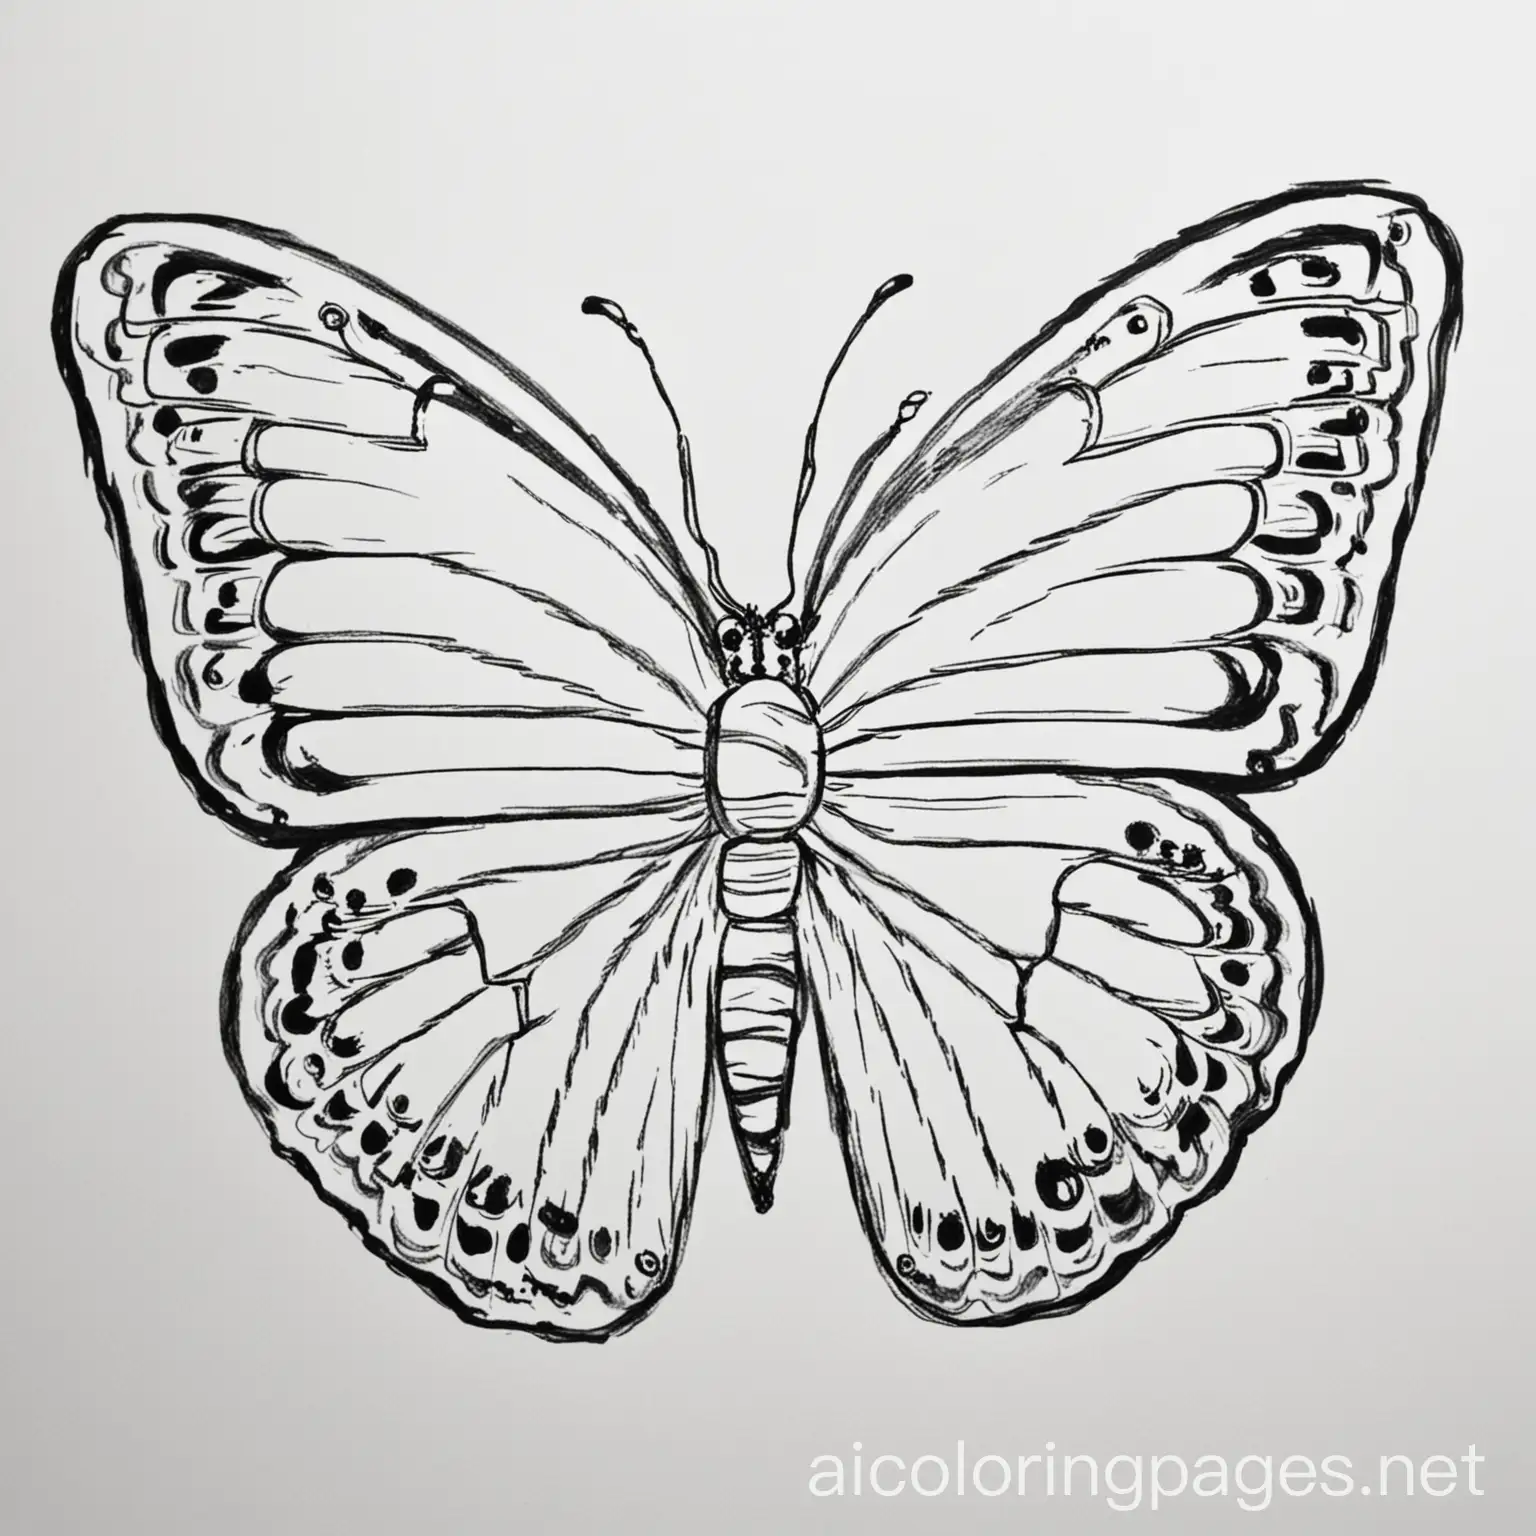 Butterfly, Coloring Page, black and white, line art, white background, Simplicity, Ample White Space. The background of the coloring page is plain white to make it easy for young children to color within the lines. The outlines of all the subjects are easy to distinguish, making it simple for kids to color without too much difficulty